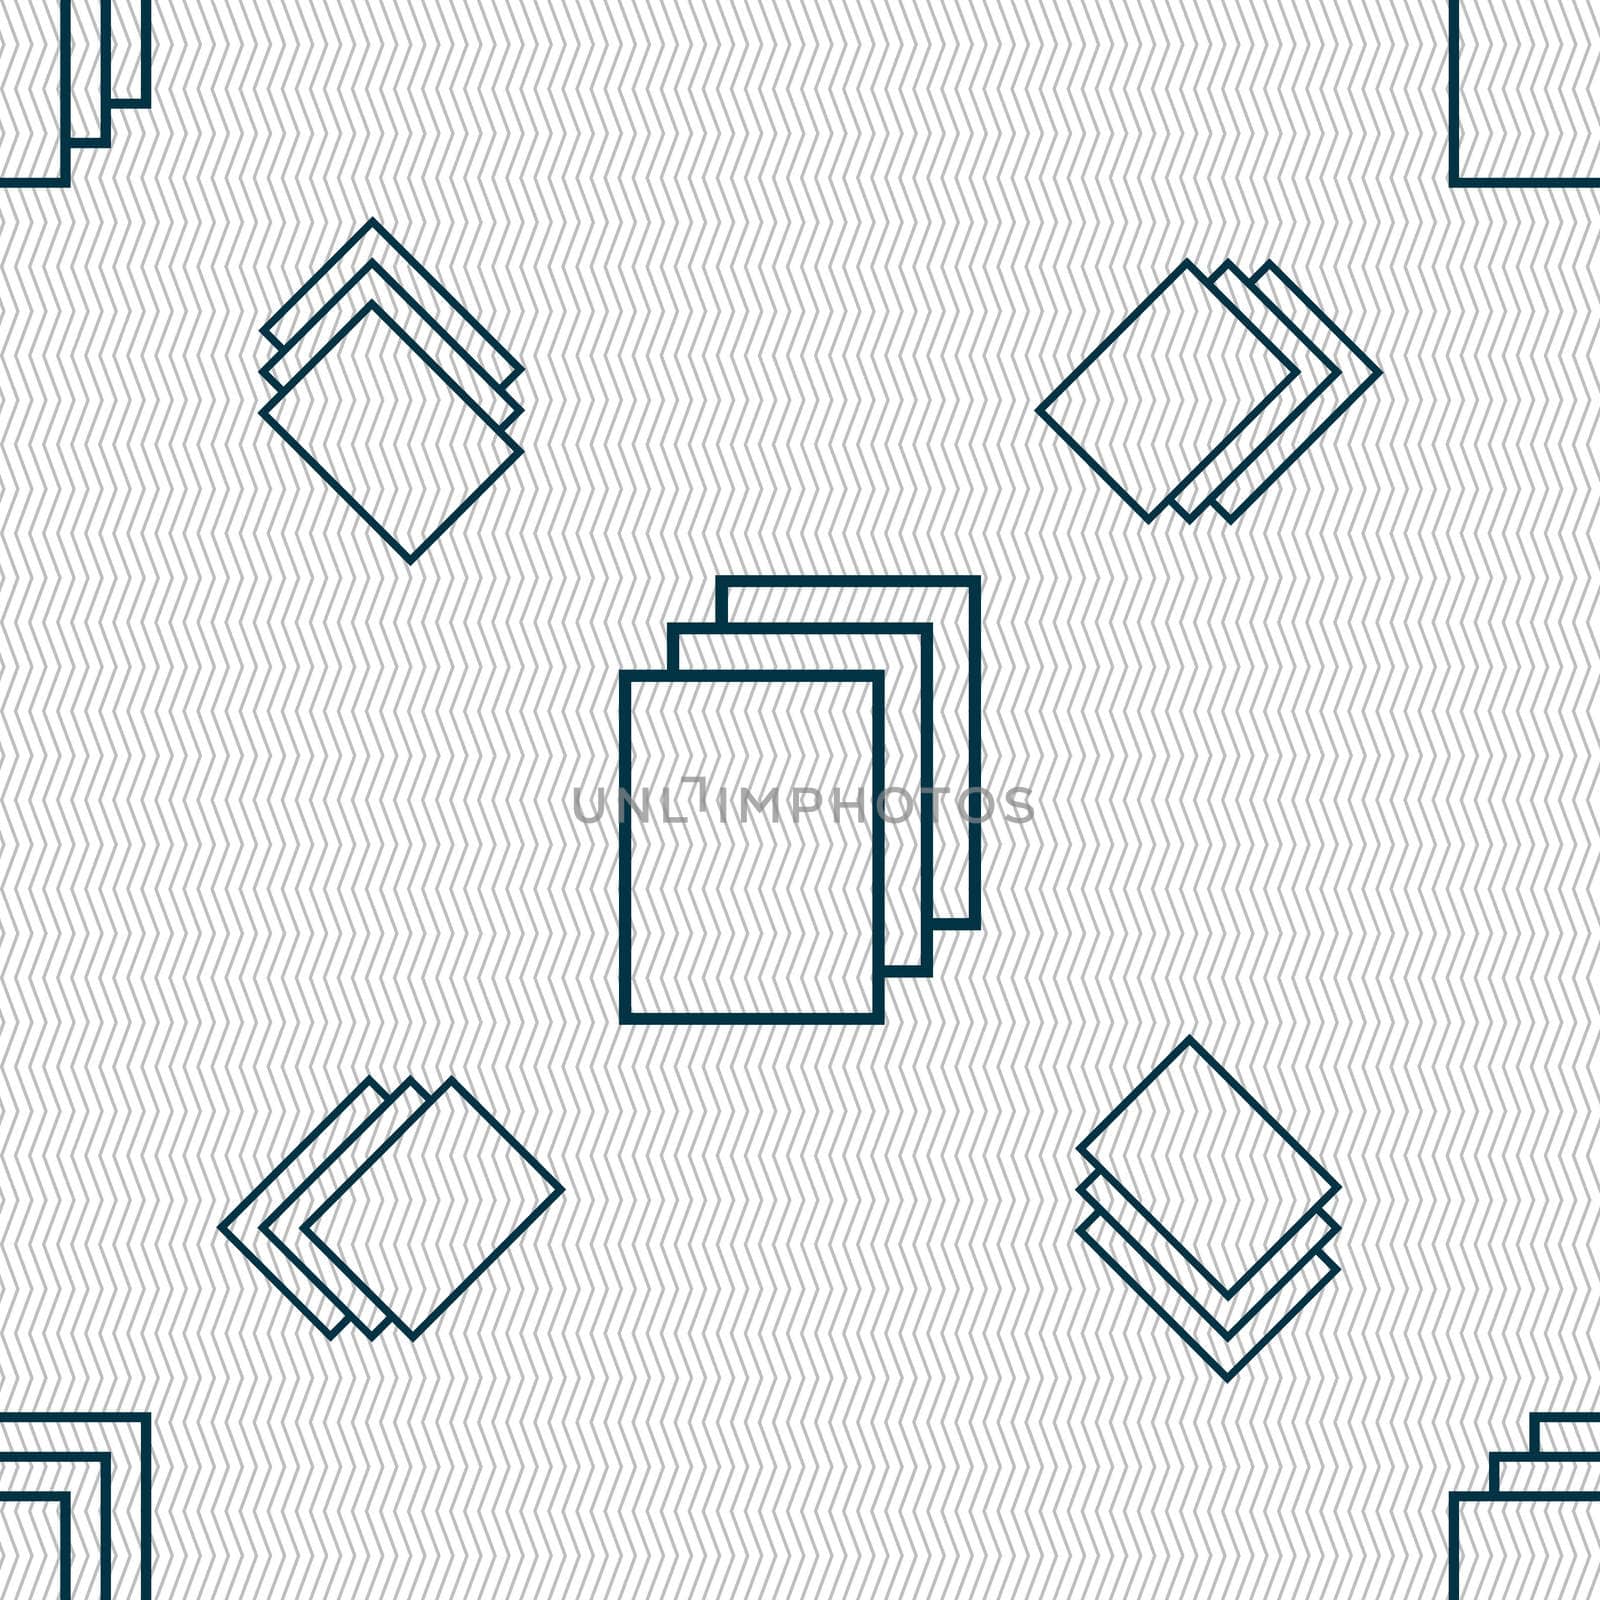 Copy file sign icon. Duplicate document symbol. Seamless pattern with geometric texture. illustration